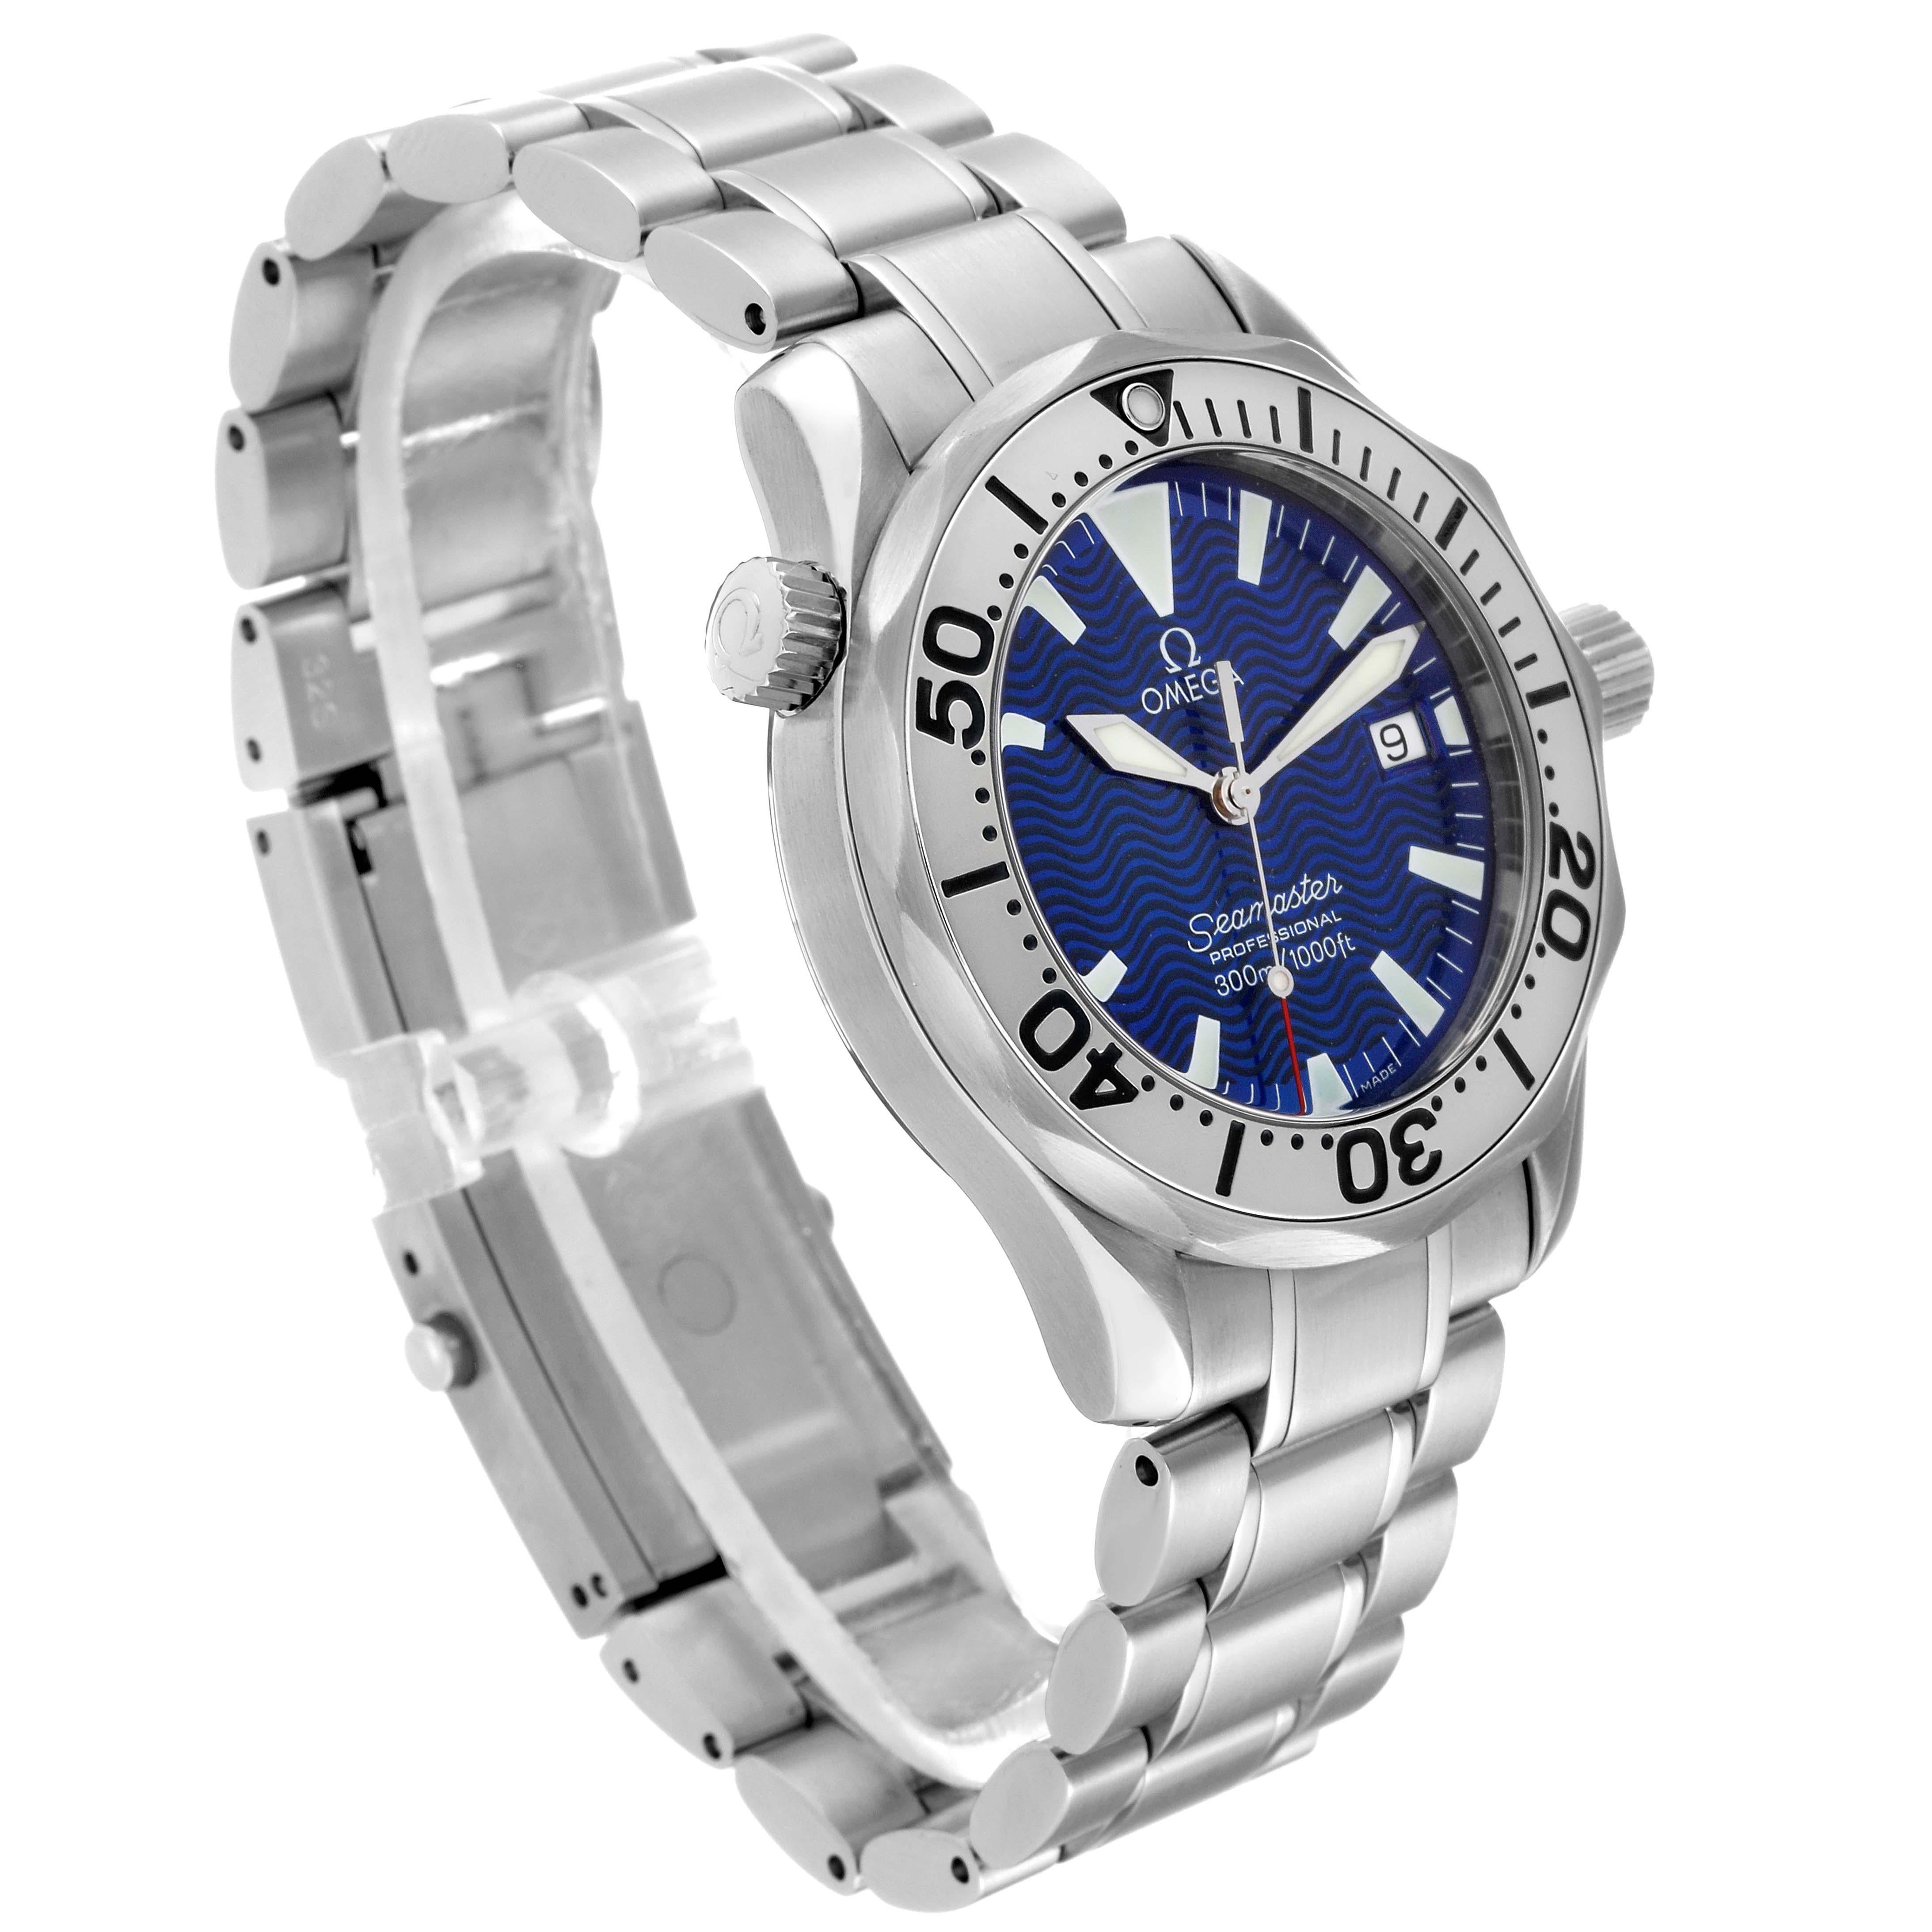 Omega Seamaster Electric Blue Wave Dial Midsize Steel Mens Watch 2263.80.00 1